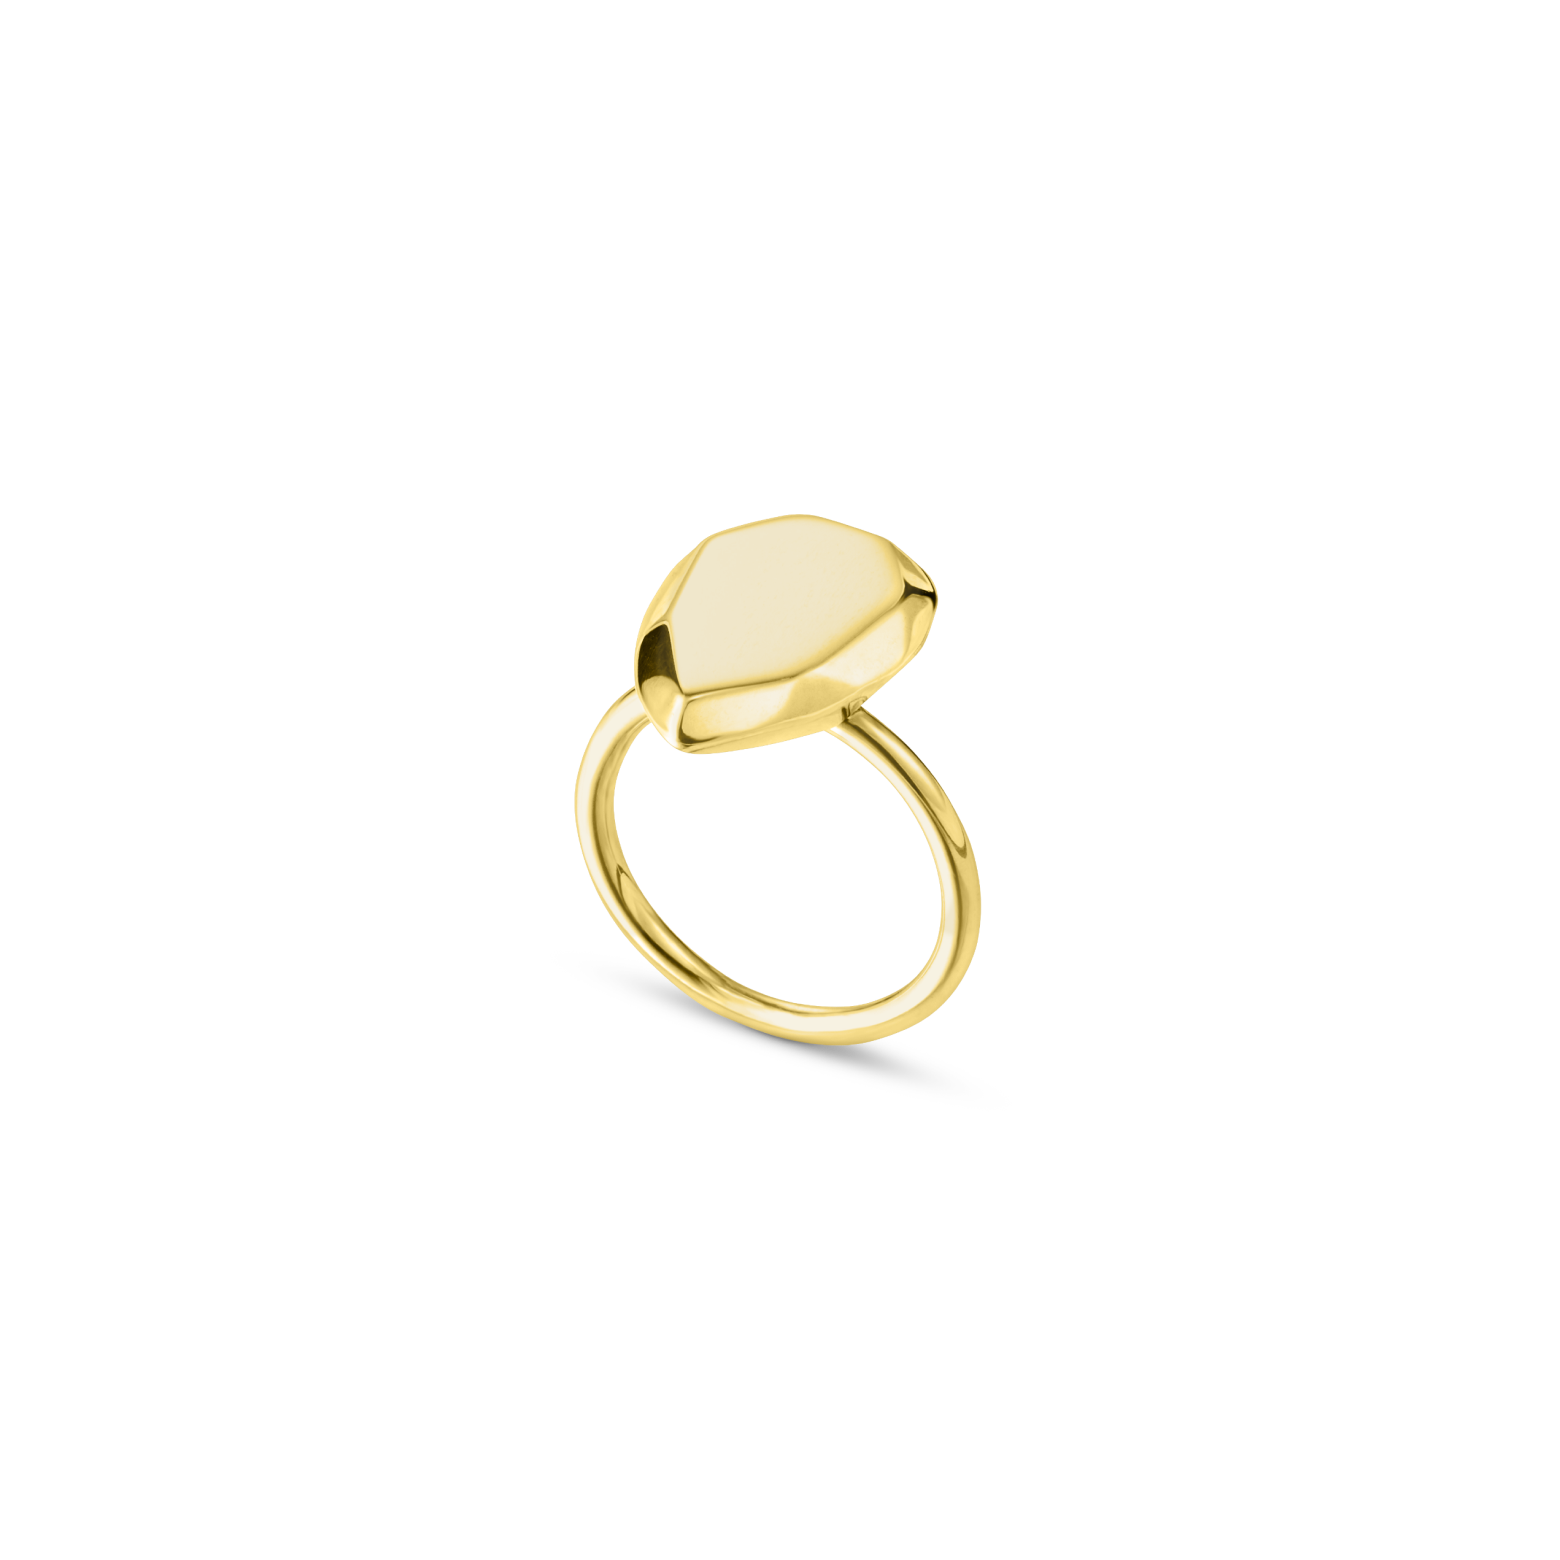 The Pear Ring